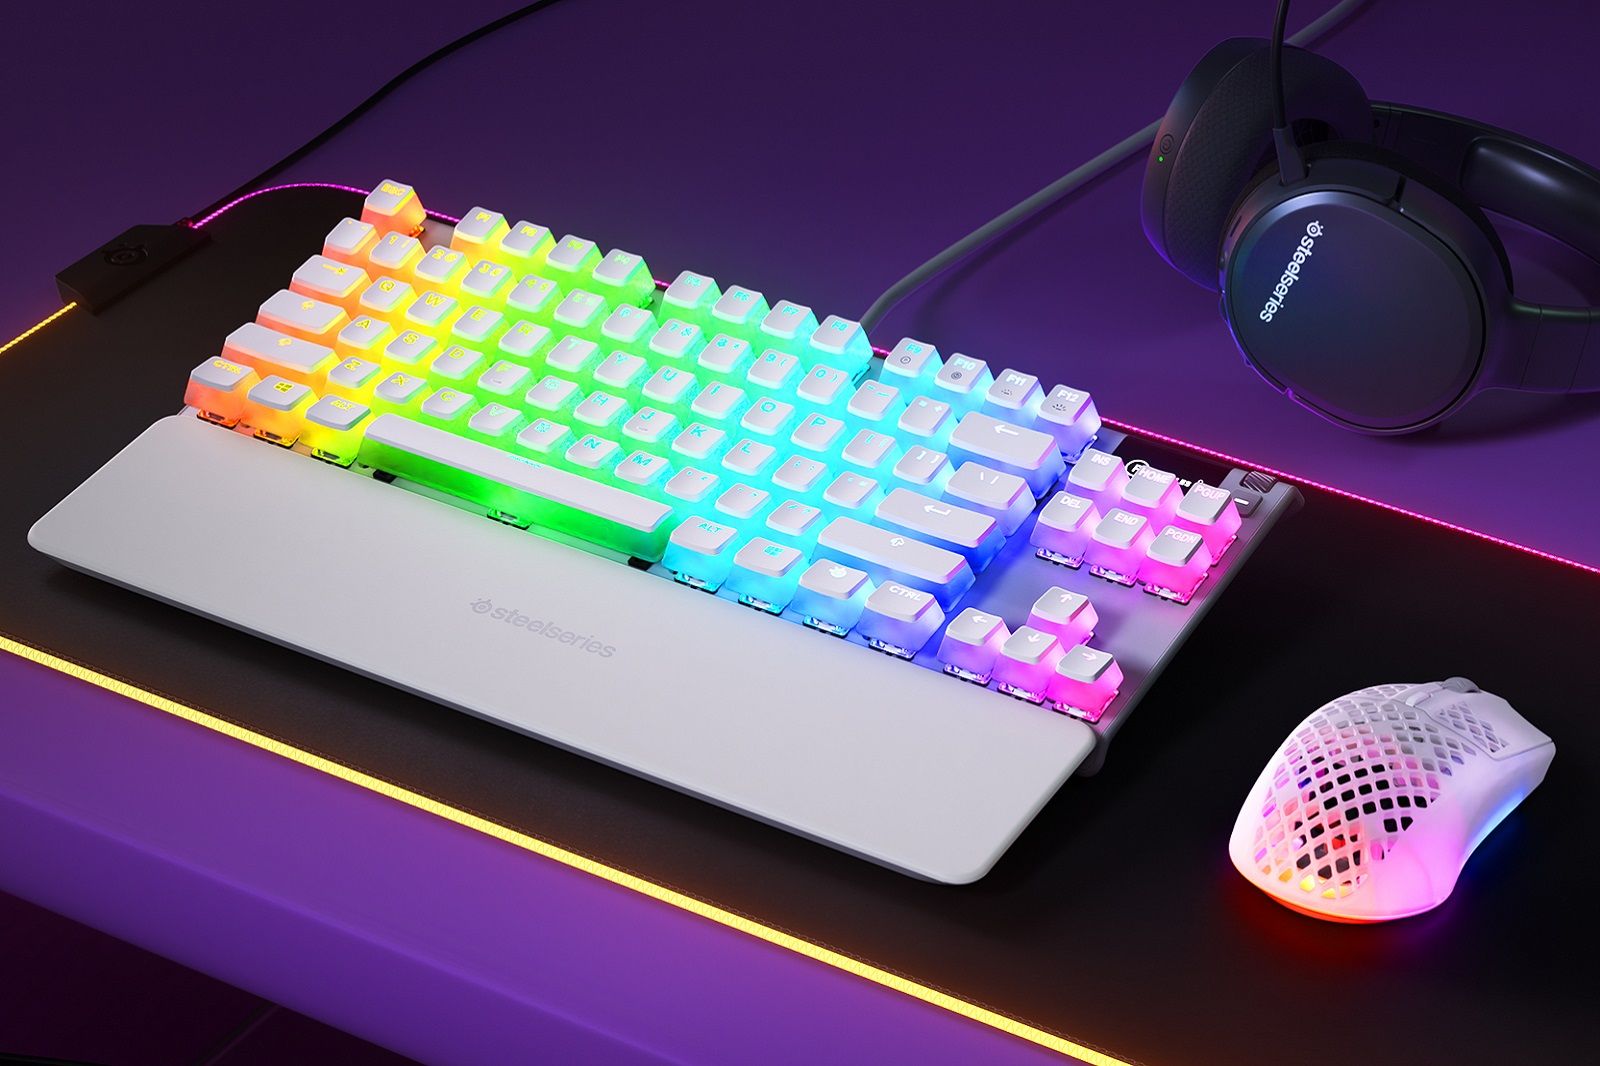 https://static0.pocketlintimages.com/wordpress/wp-content/uploads/158457-gadgets-news-steelseries-goes-seriously-snazzy-with-the-limited-edition-ghost-collection-image2-qmpont65j2.jpg